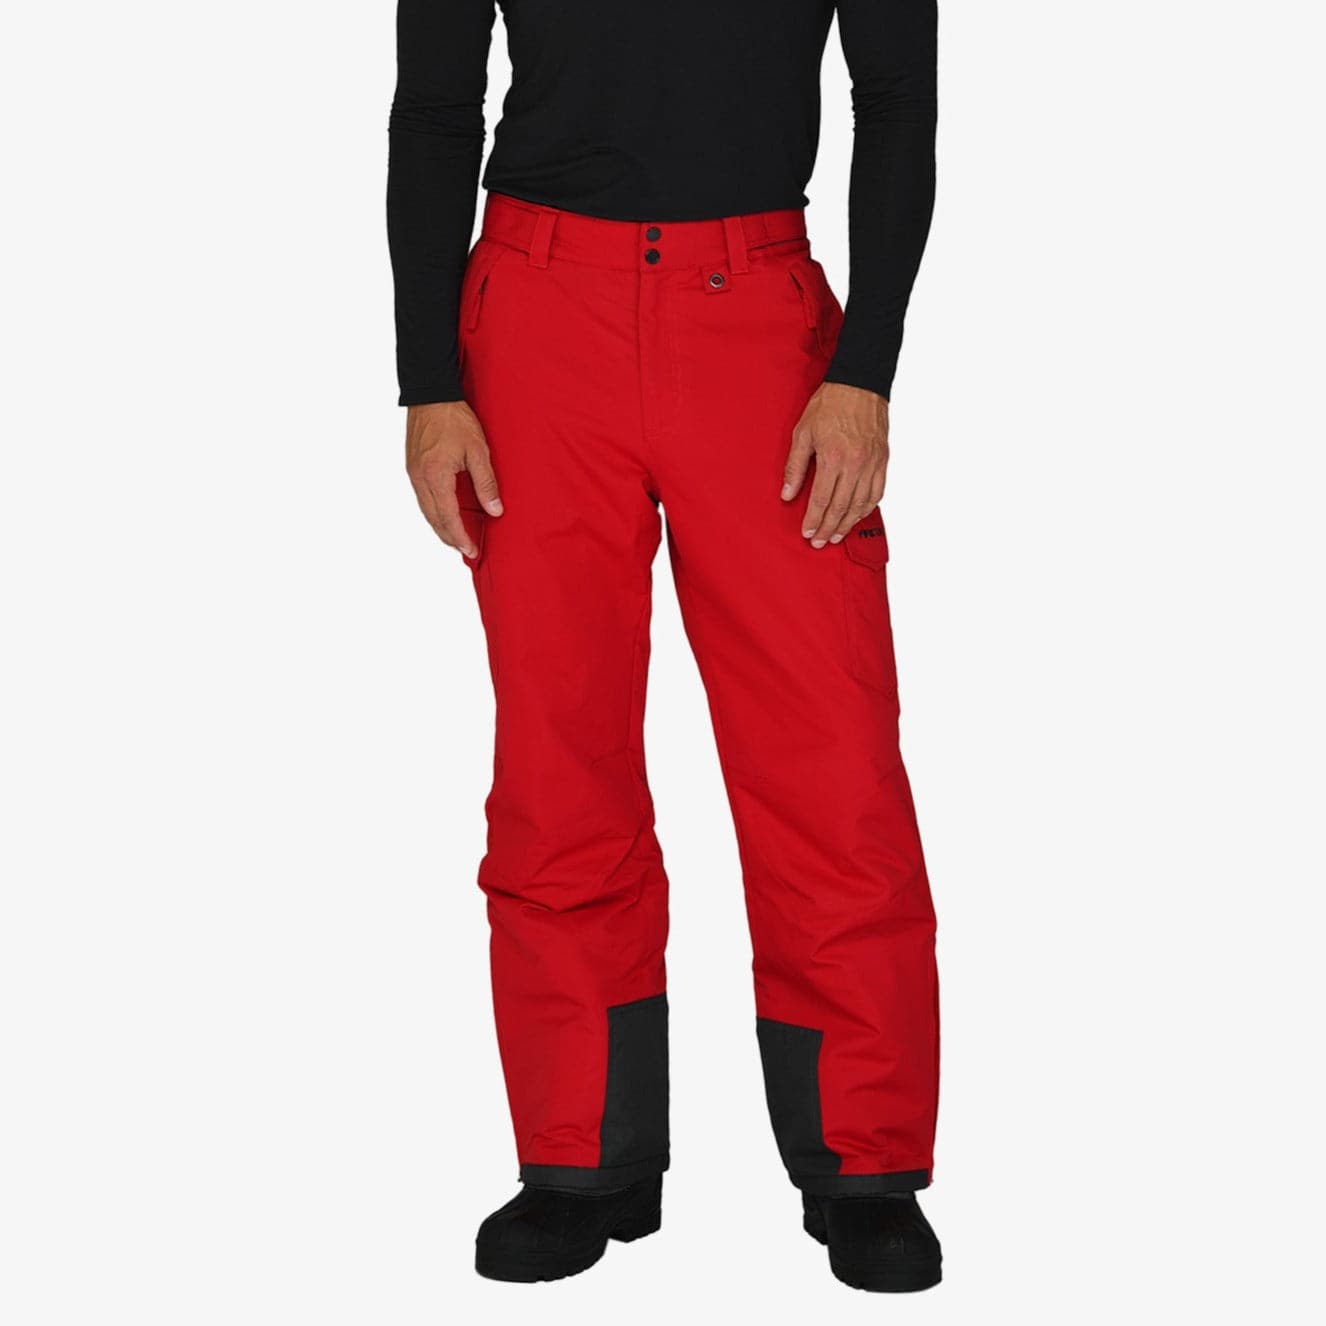 Men's Insulated Snowsports Cargo Pants - 36 Inseam-Vintage Red